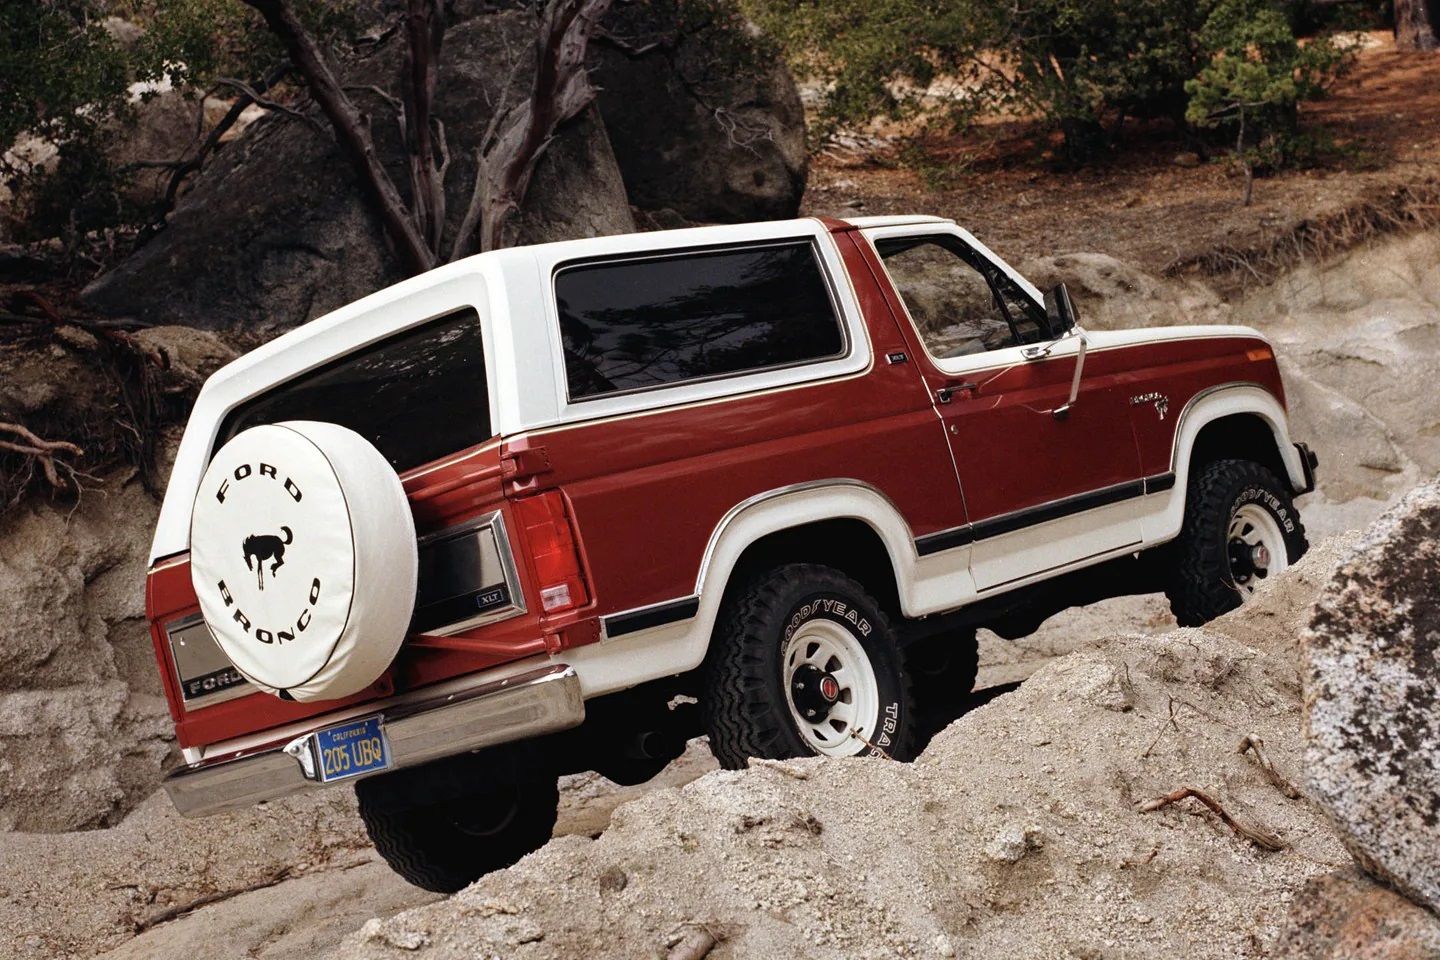 The 1981 Ford Bronco goes over a challenging terrain. 